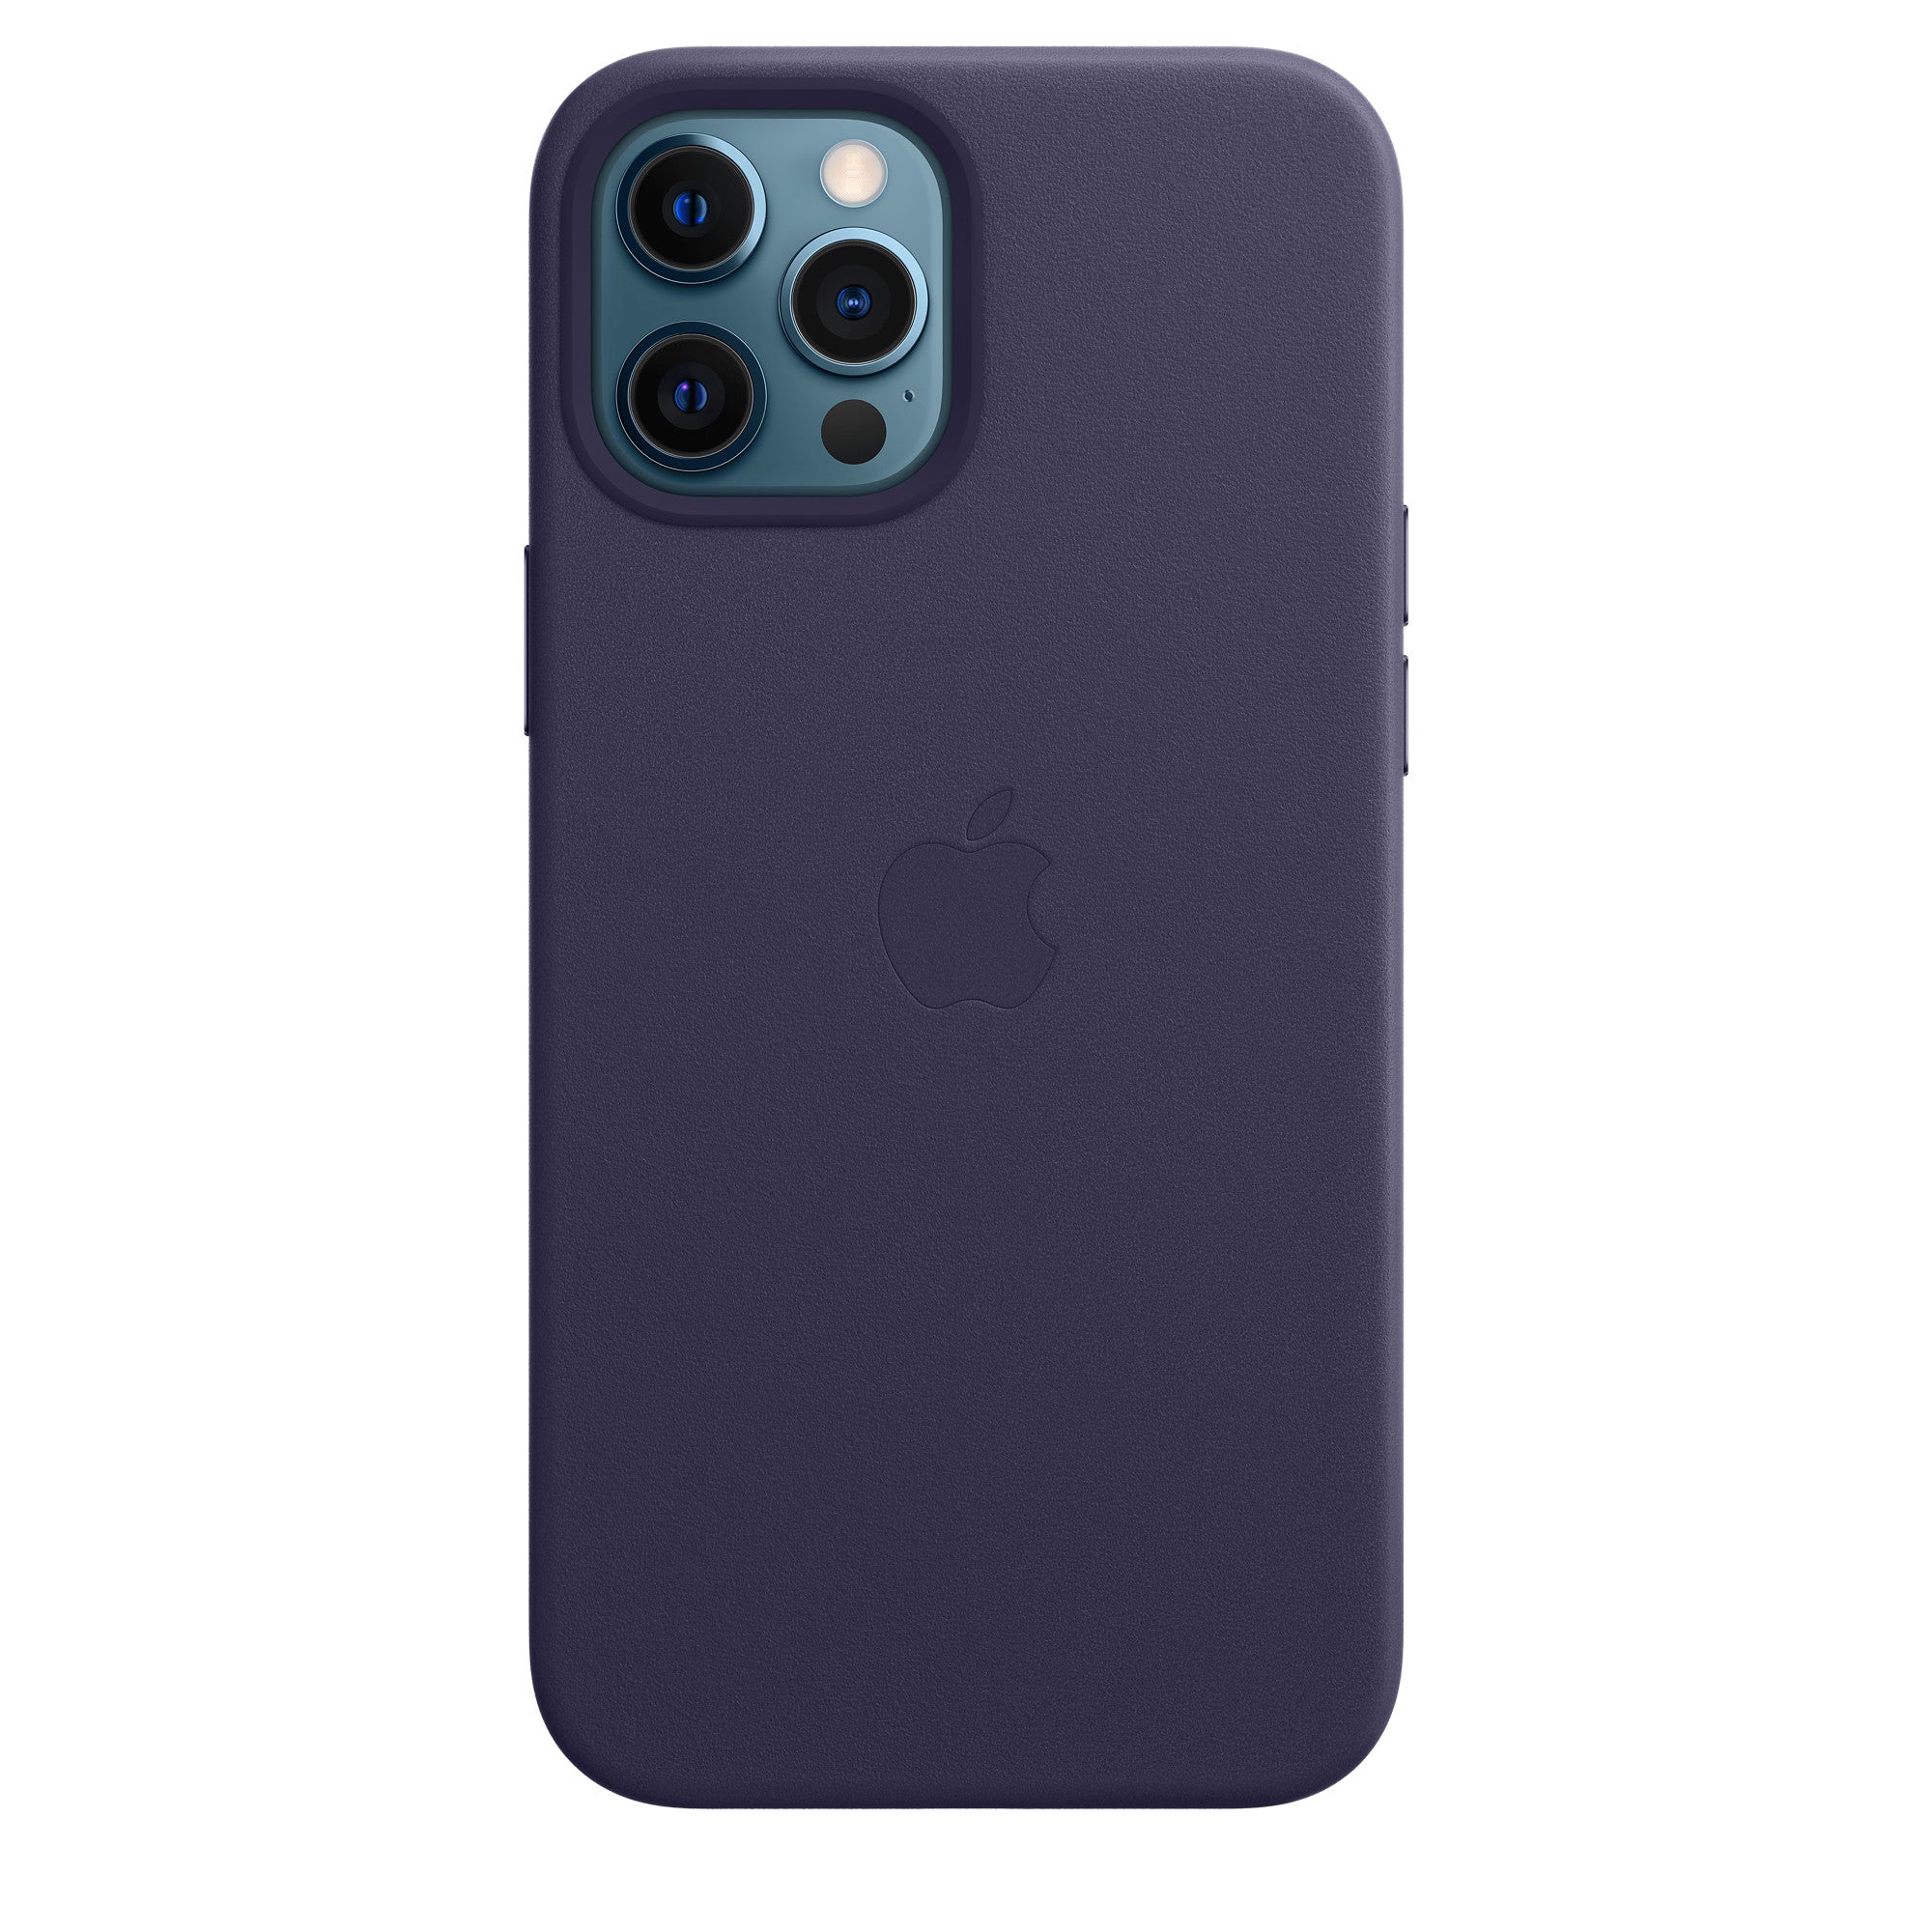 Apple iPhone 12 Pro Max Leather Case - Deep Violet - Brand New